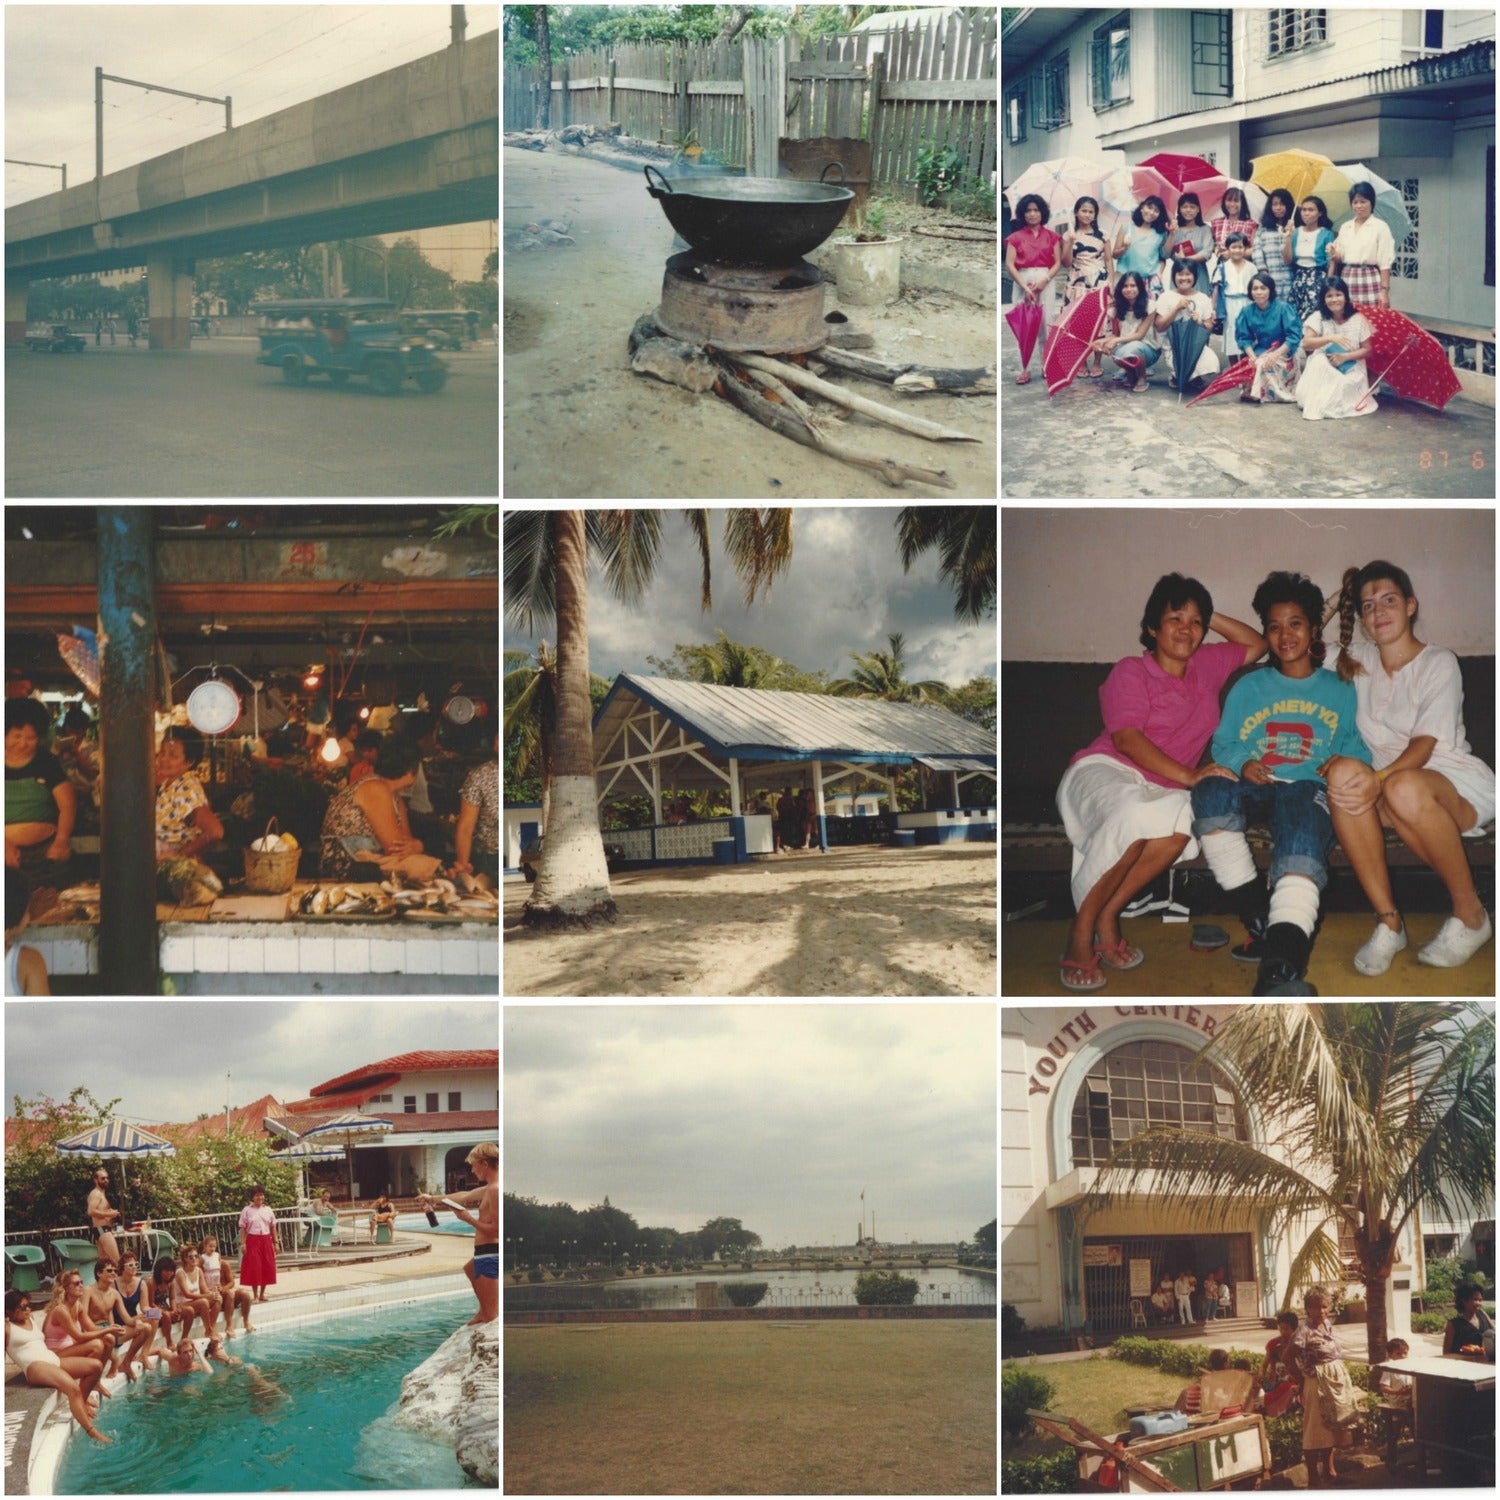 MEMORIES OF MY PHILIPPINES TRIP PHOTO CREDIT:  MICHELLE SOMERS TOP TO BOTTOM 1ST ROW:  JEEPNEYS DRIVING BY, A COOKING POT, THE BEAUTIFUL WOMEN WE MET 2ND ROW:  THE OLONGAPO CITY MARKET, BEACH PART OF THE NAVY BASE IN OLONGAPO, (THELMA, AMY AND I), 3RD ROW: WHITE ROCK, RIZAL PARK IN MANILLA, MANILLA YOUTH CENTRE